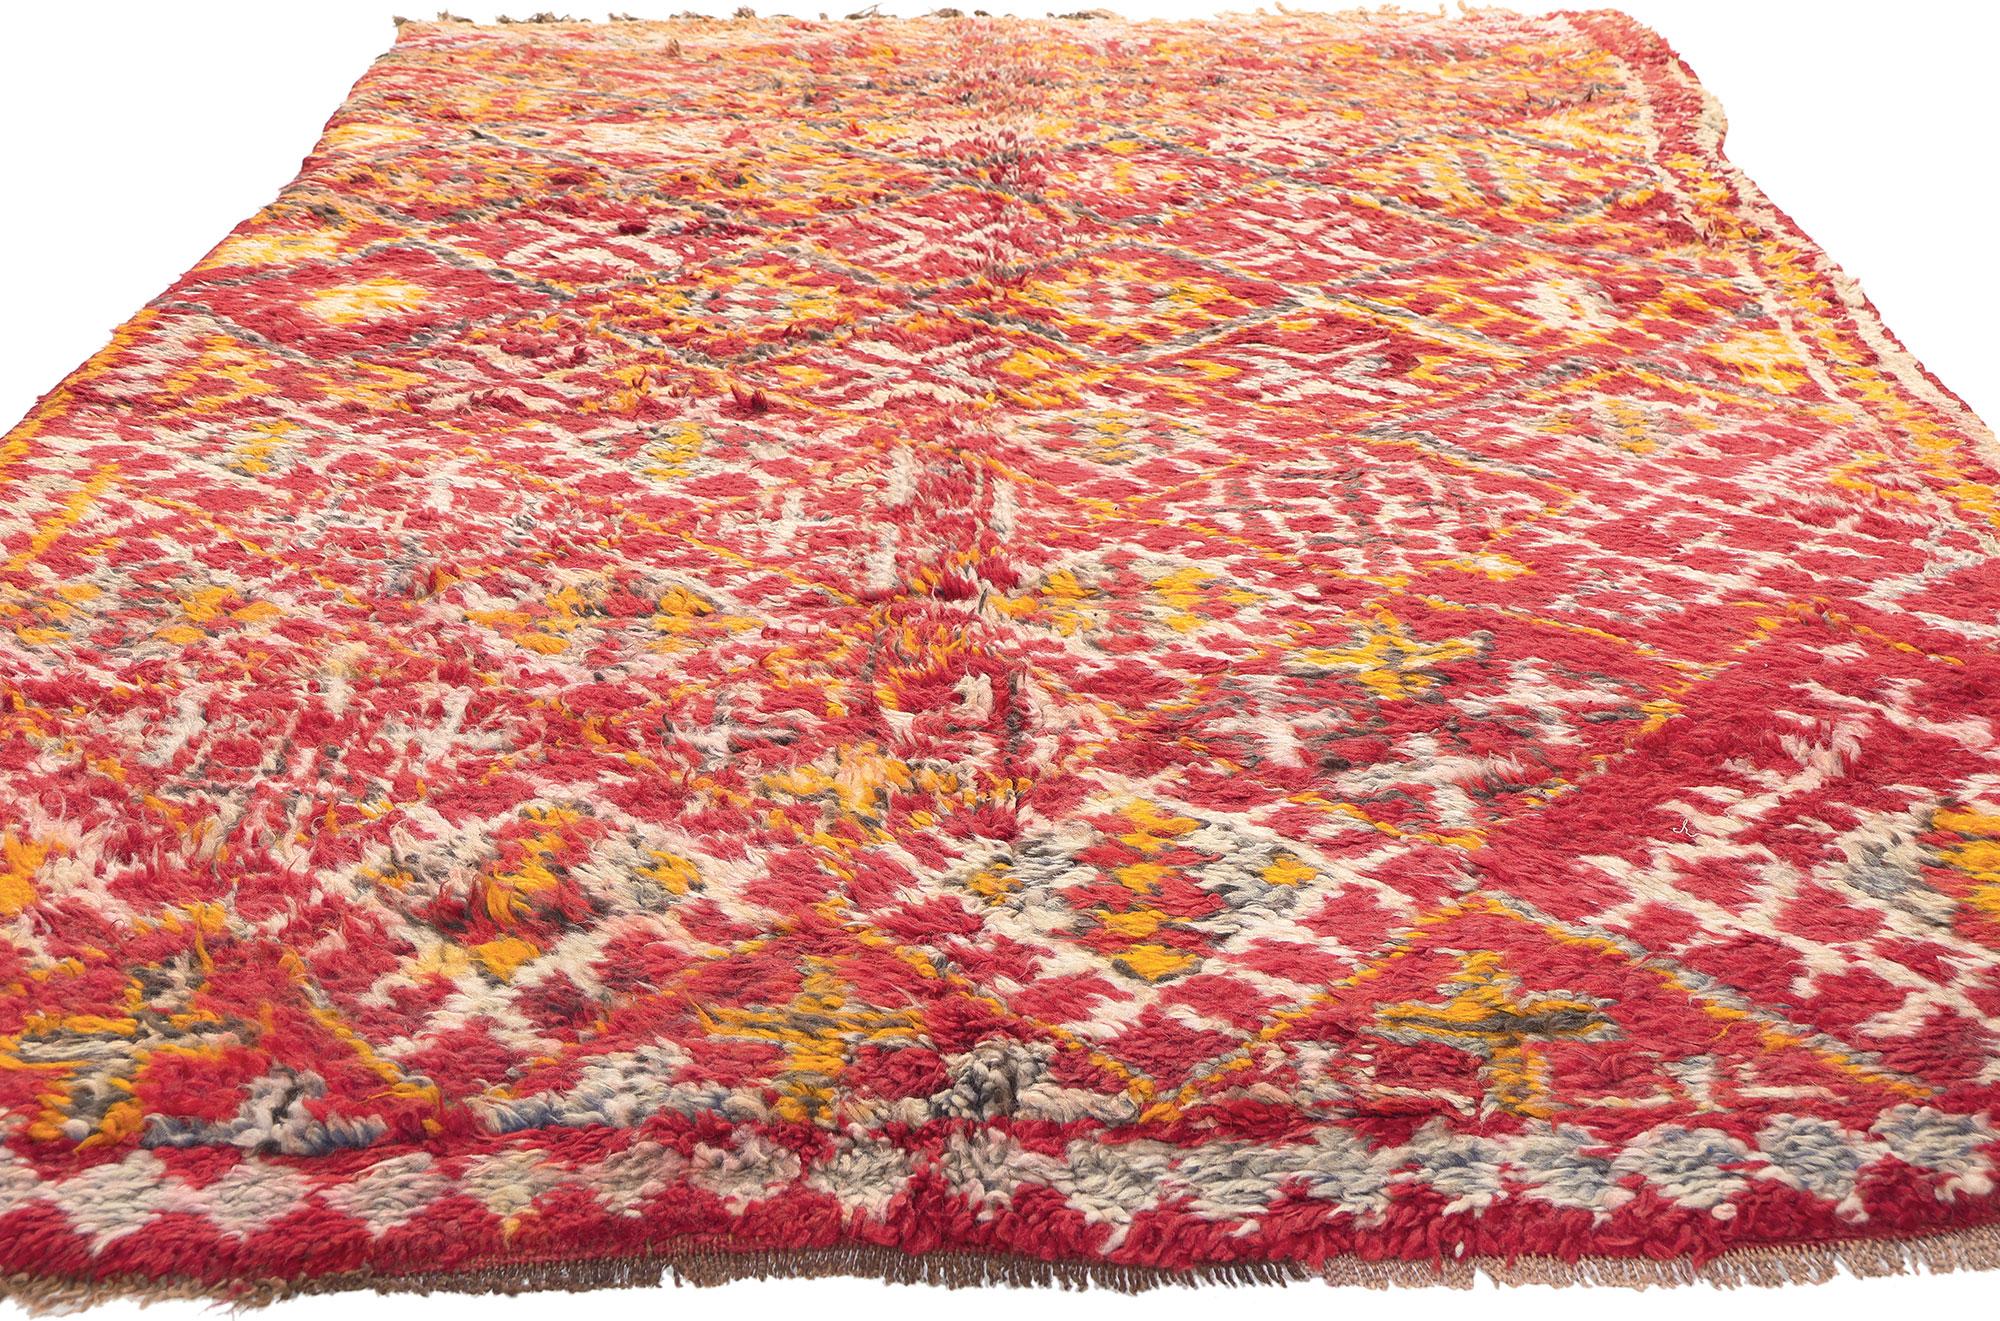 Mid-Century Modern Vintage Beni MGuild Moroccan Rug, Midcentury Modern Meets Spicy Boho Chic For Sale